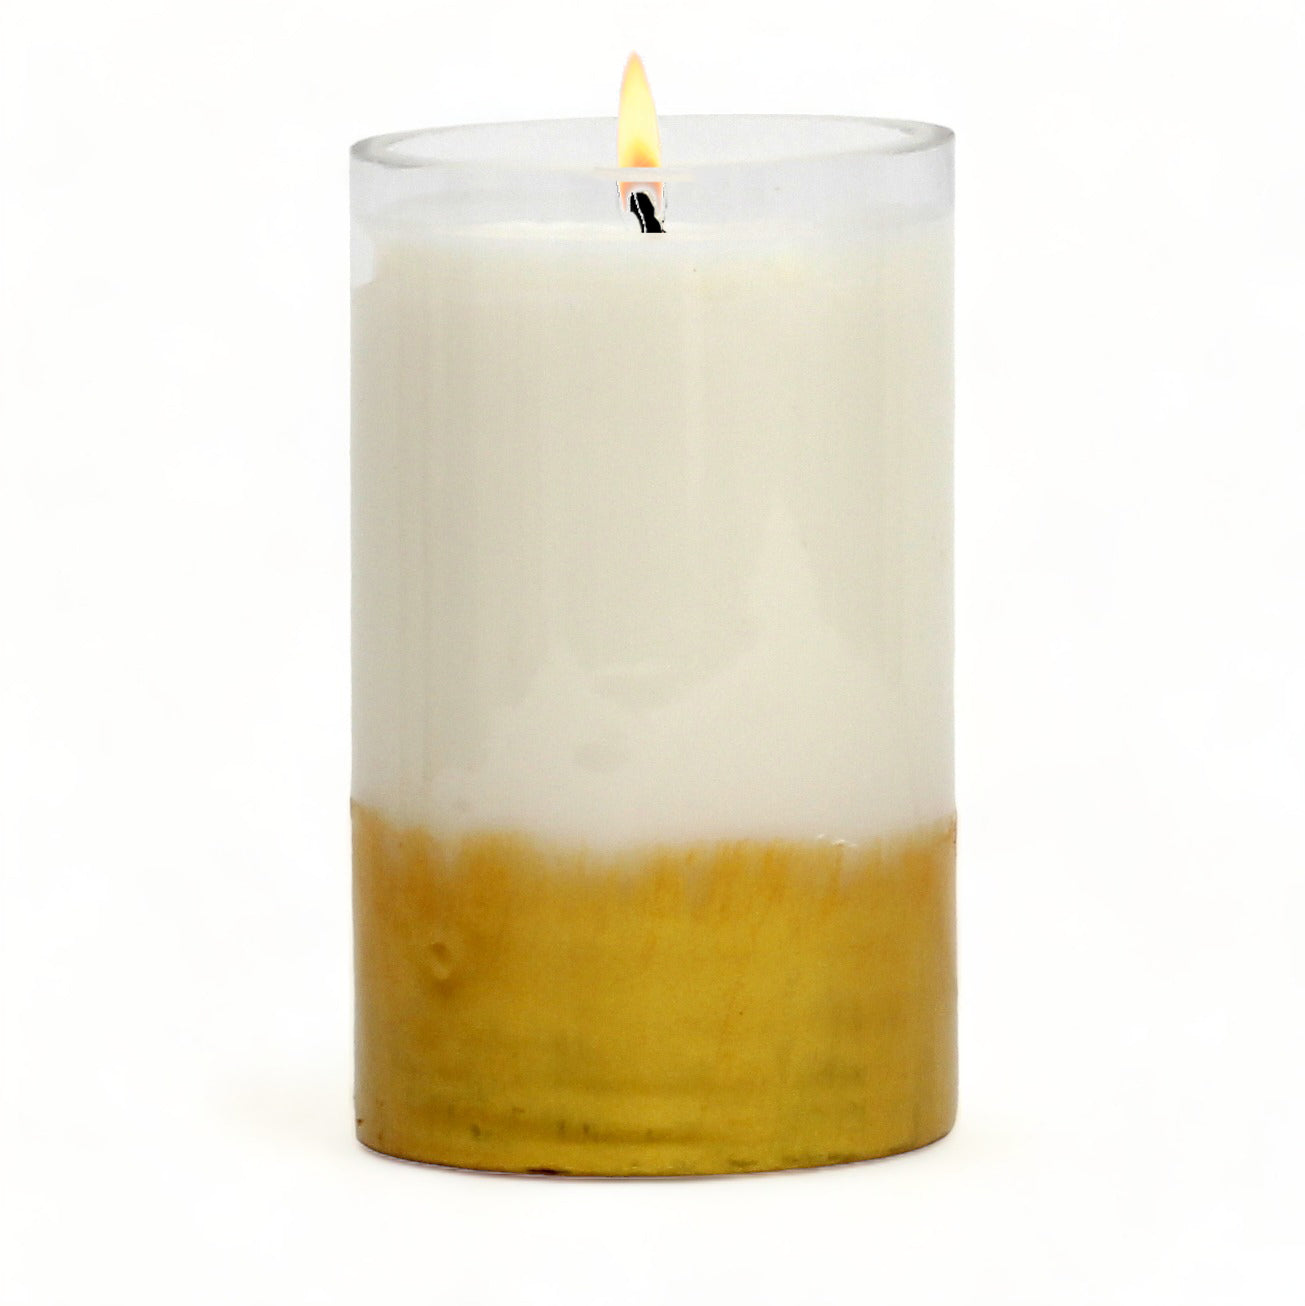 GILDED: Soy Wax Candle with hand painted gold accent. Medium Tall round thick glass container